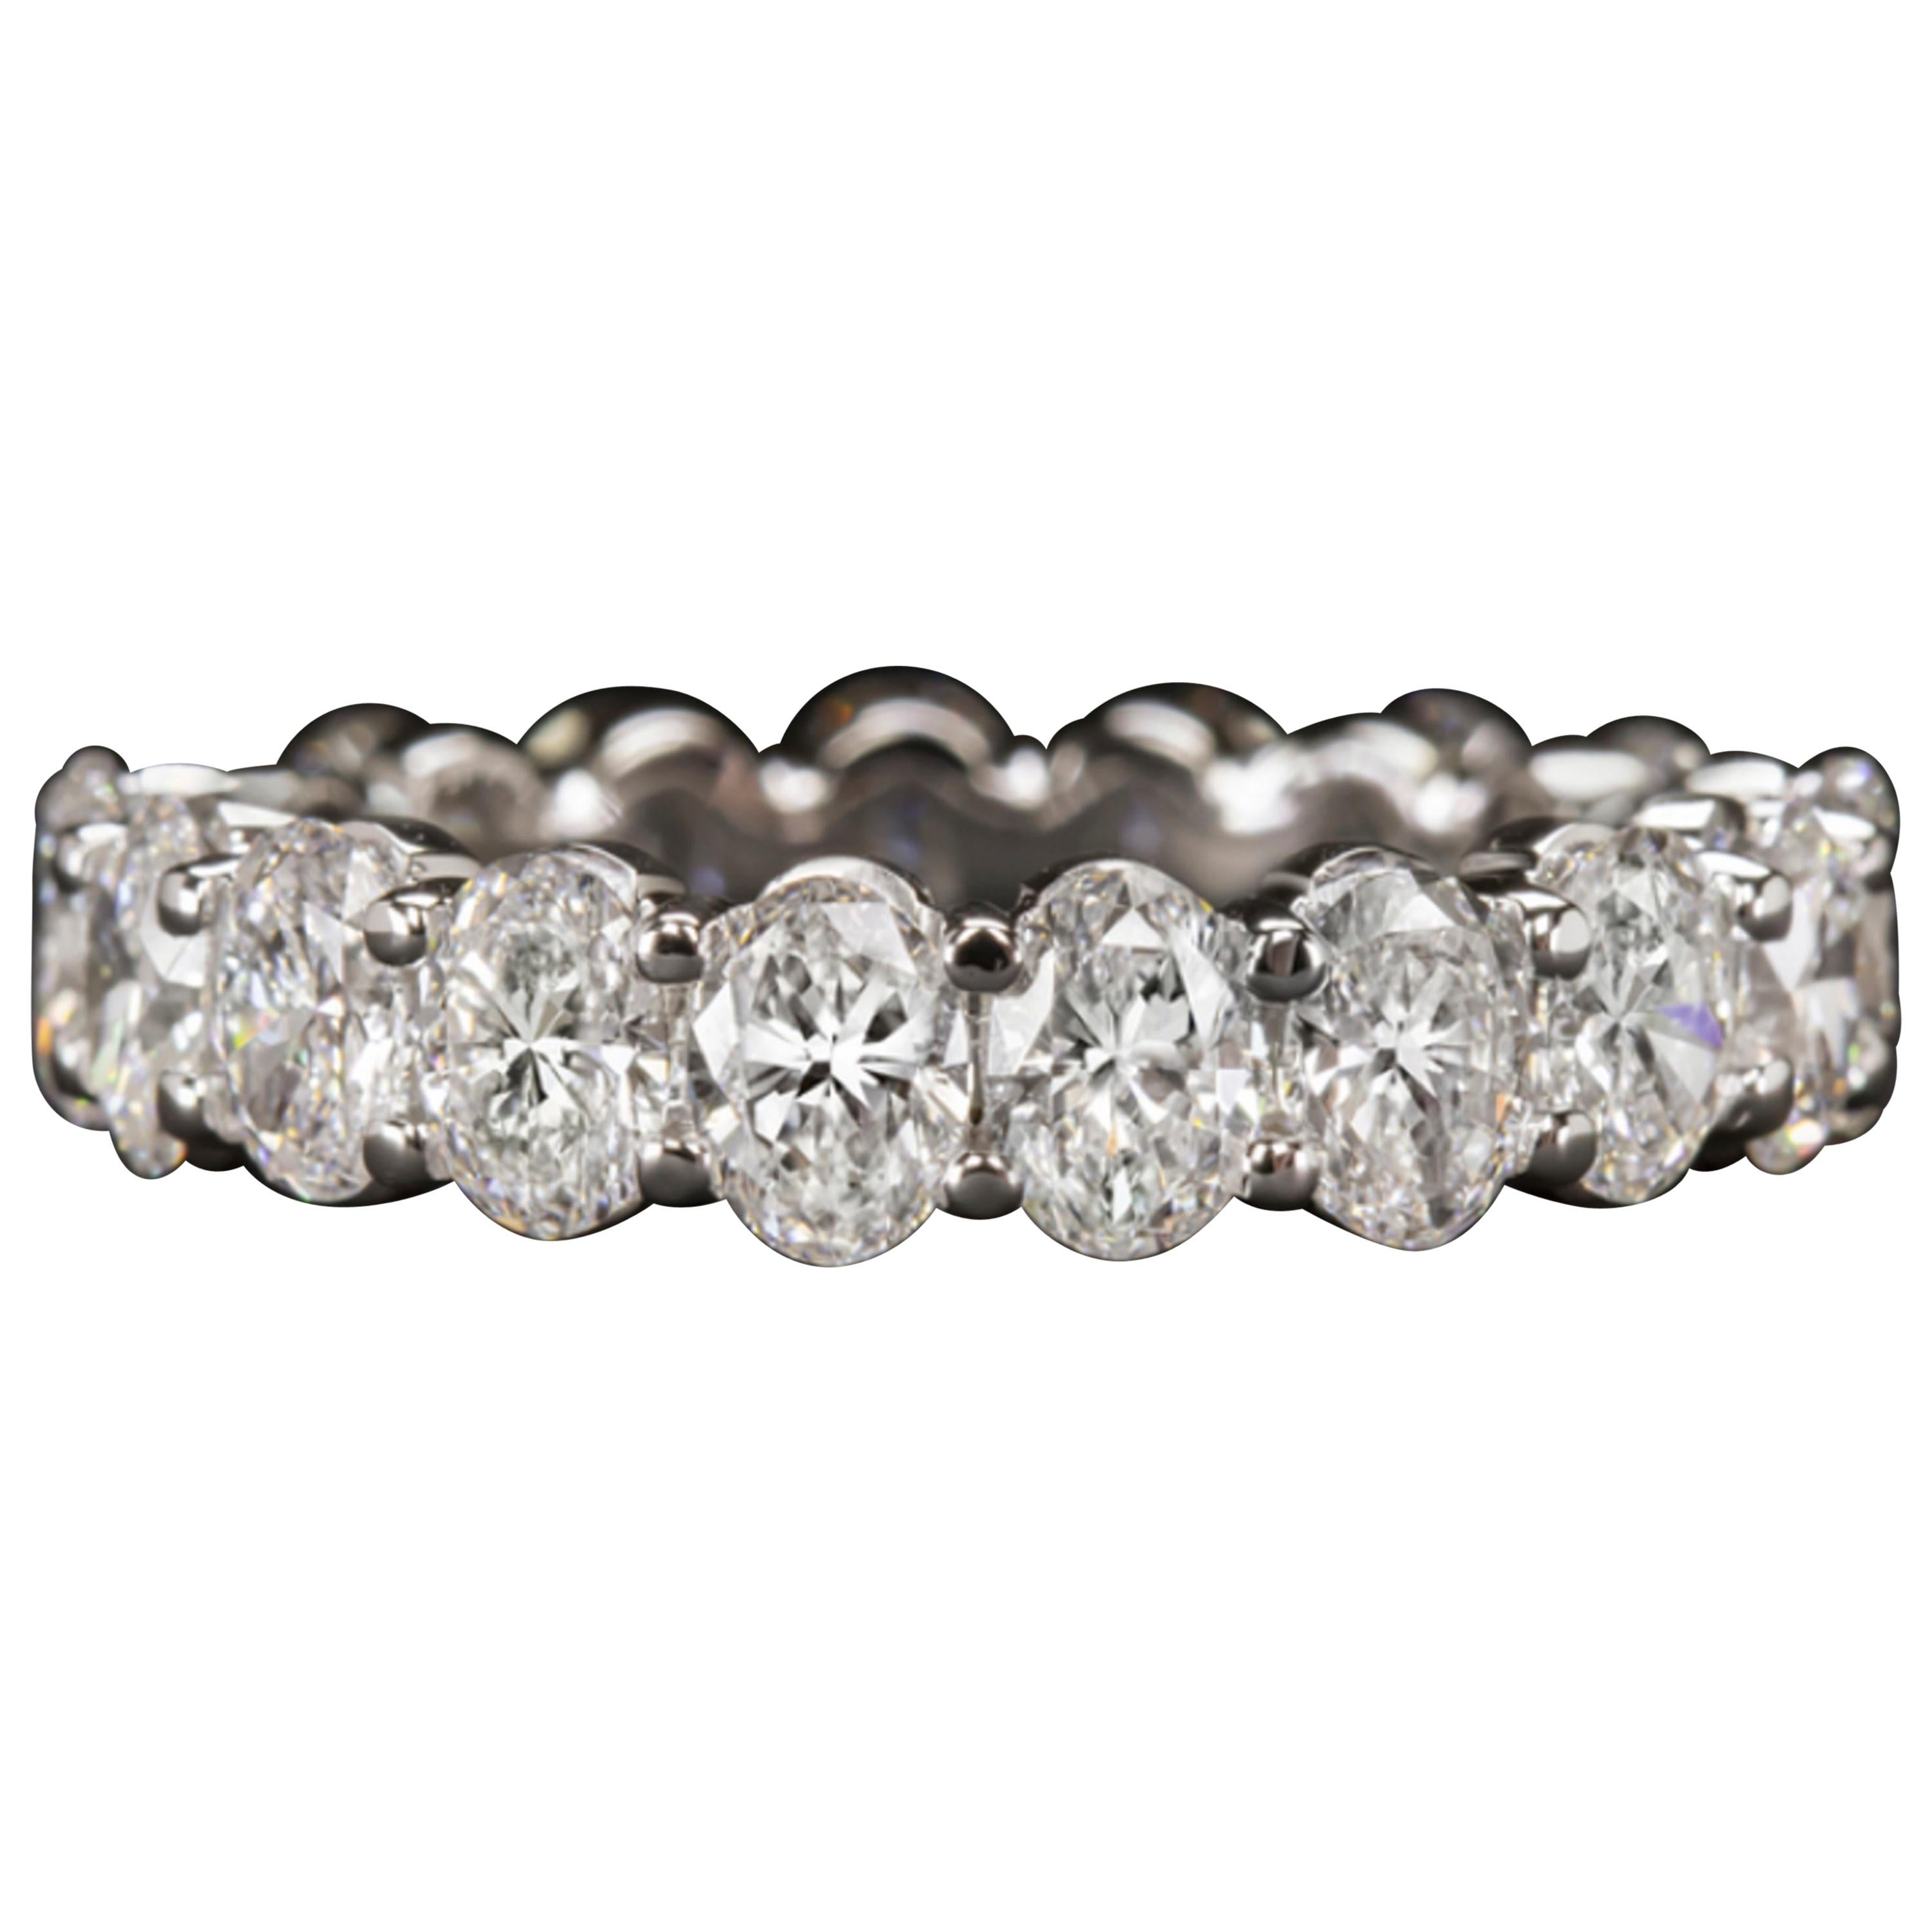 Eternity ring features approximately 3.60 carat of vibrant oval cut diamonds set in an elegantly simple modern band. High quality, perfectly matched, and substantially sized diamonds cover the full diameter of the ring in dazzling sparkle. Bright